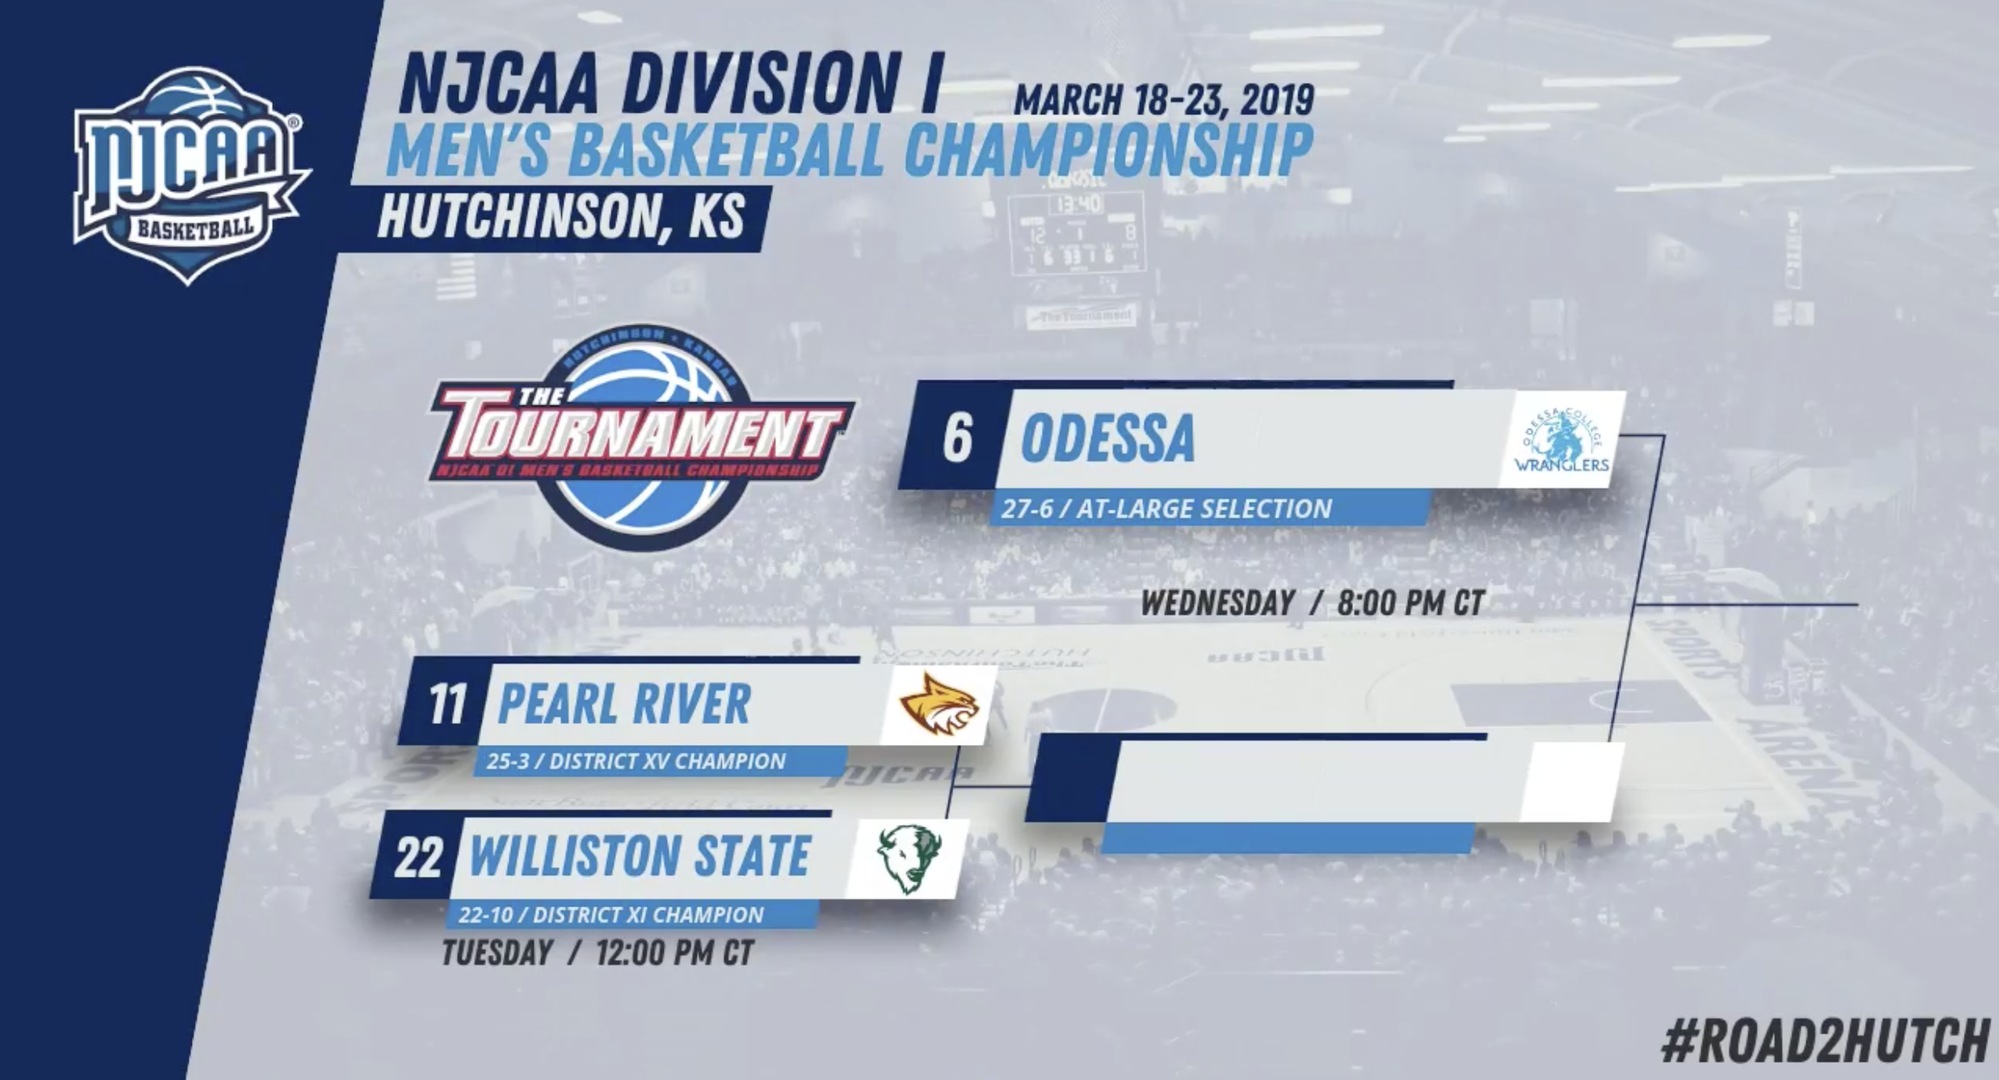 Pearl River earns 11th seed, will face Williston State in NJCAA Tournament